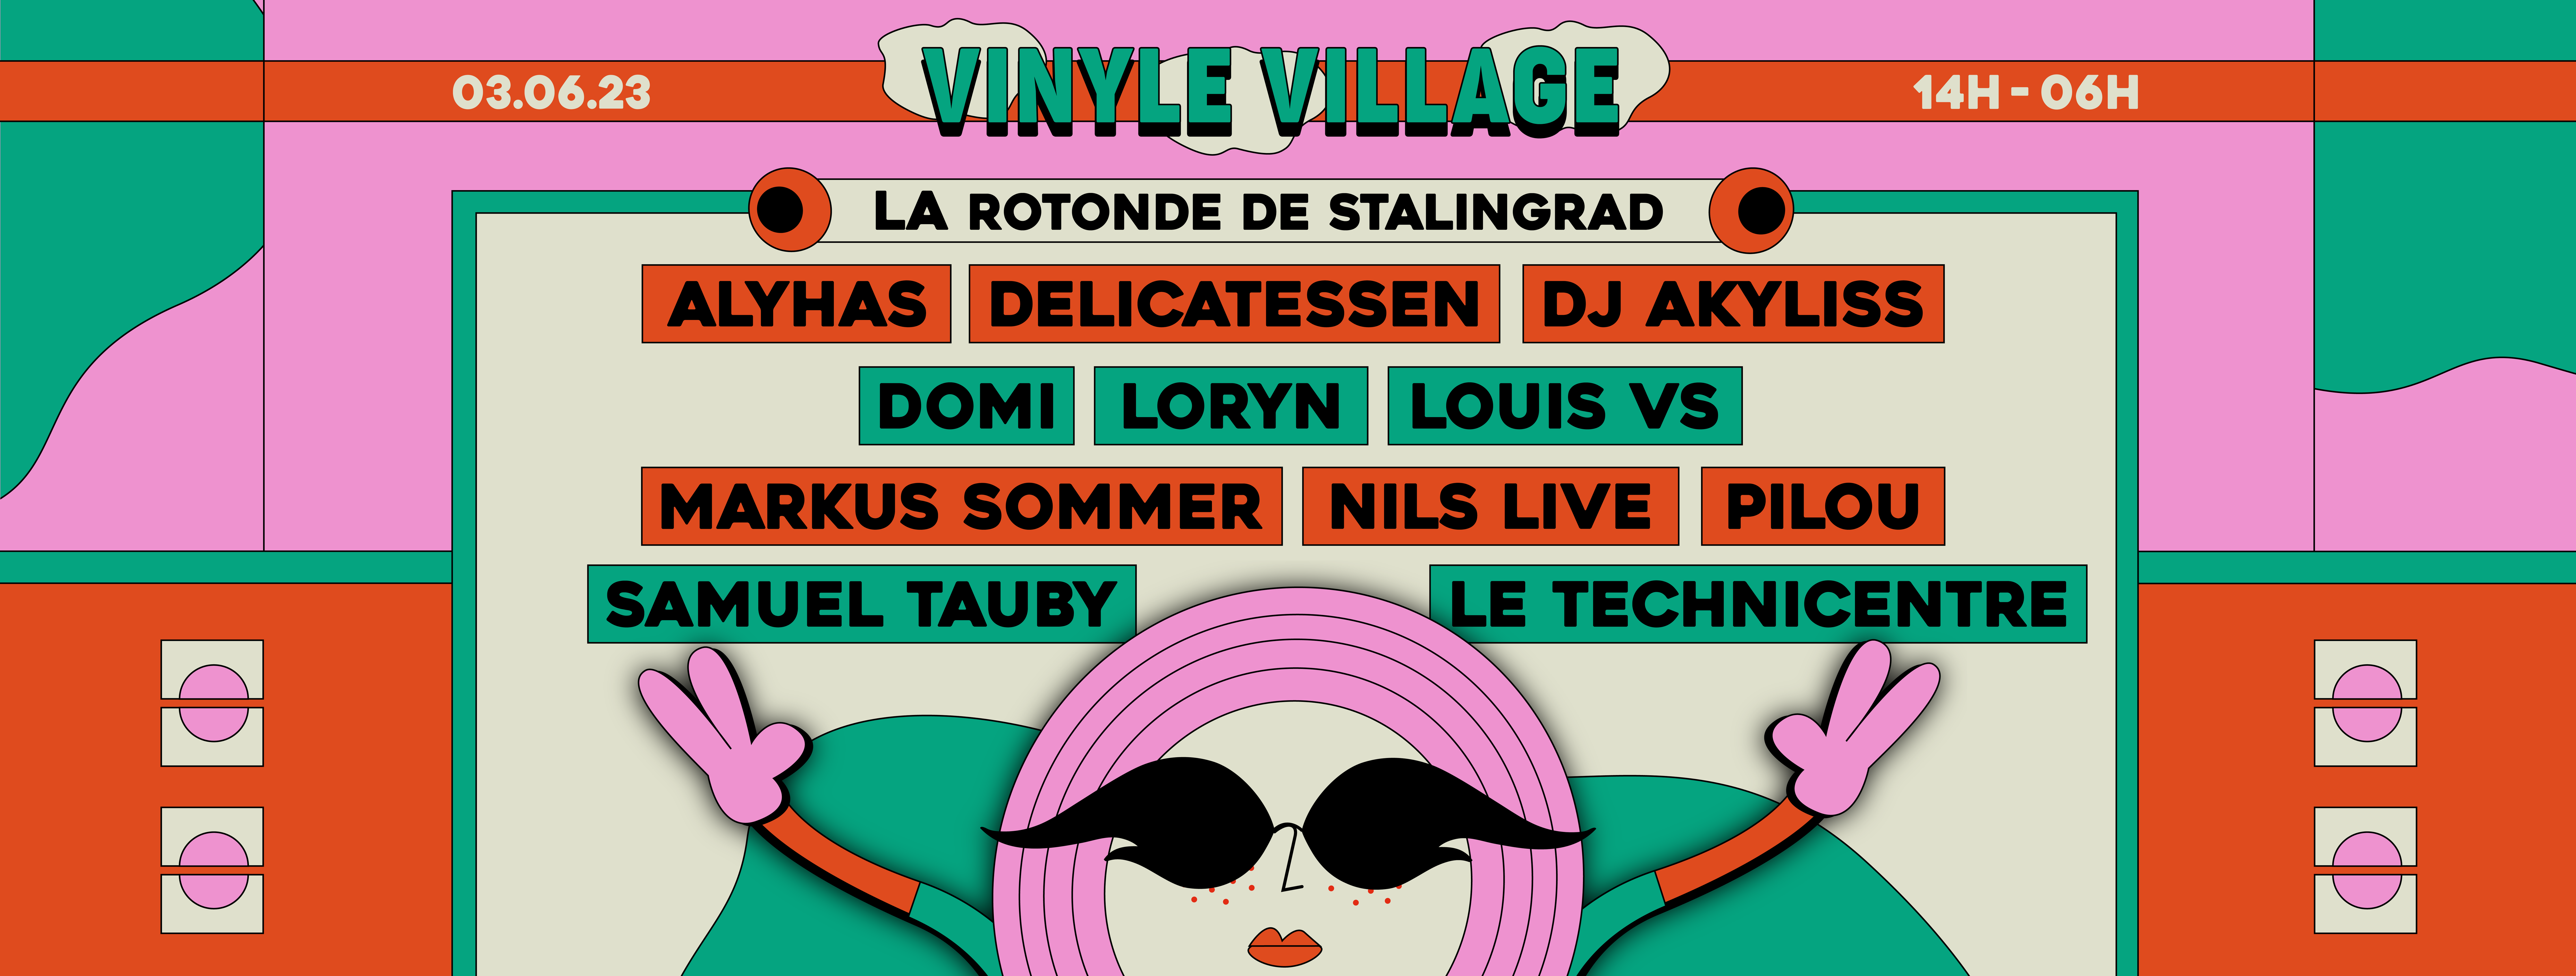 Vinyle Village House Of Skeud ⚘ Markus Sommer & More (Open Air + Club XXL) - フライヤー表